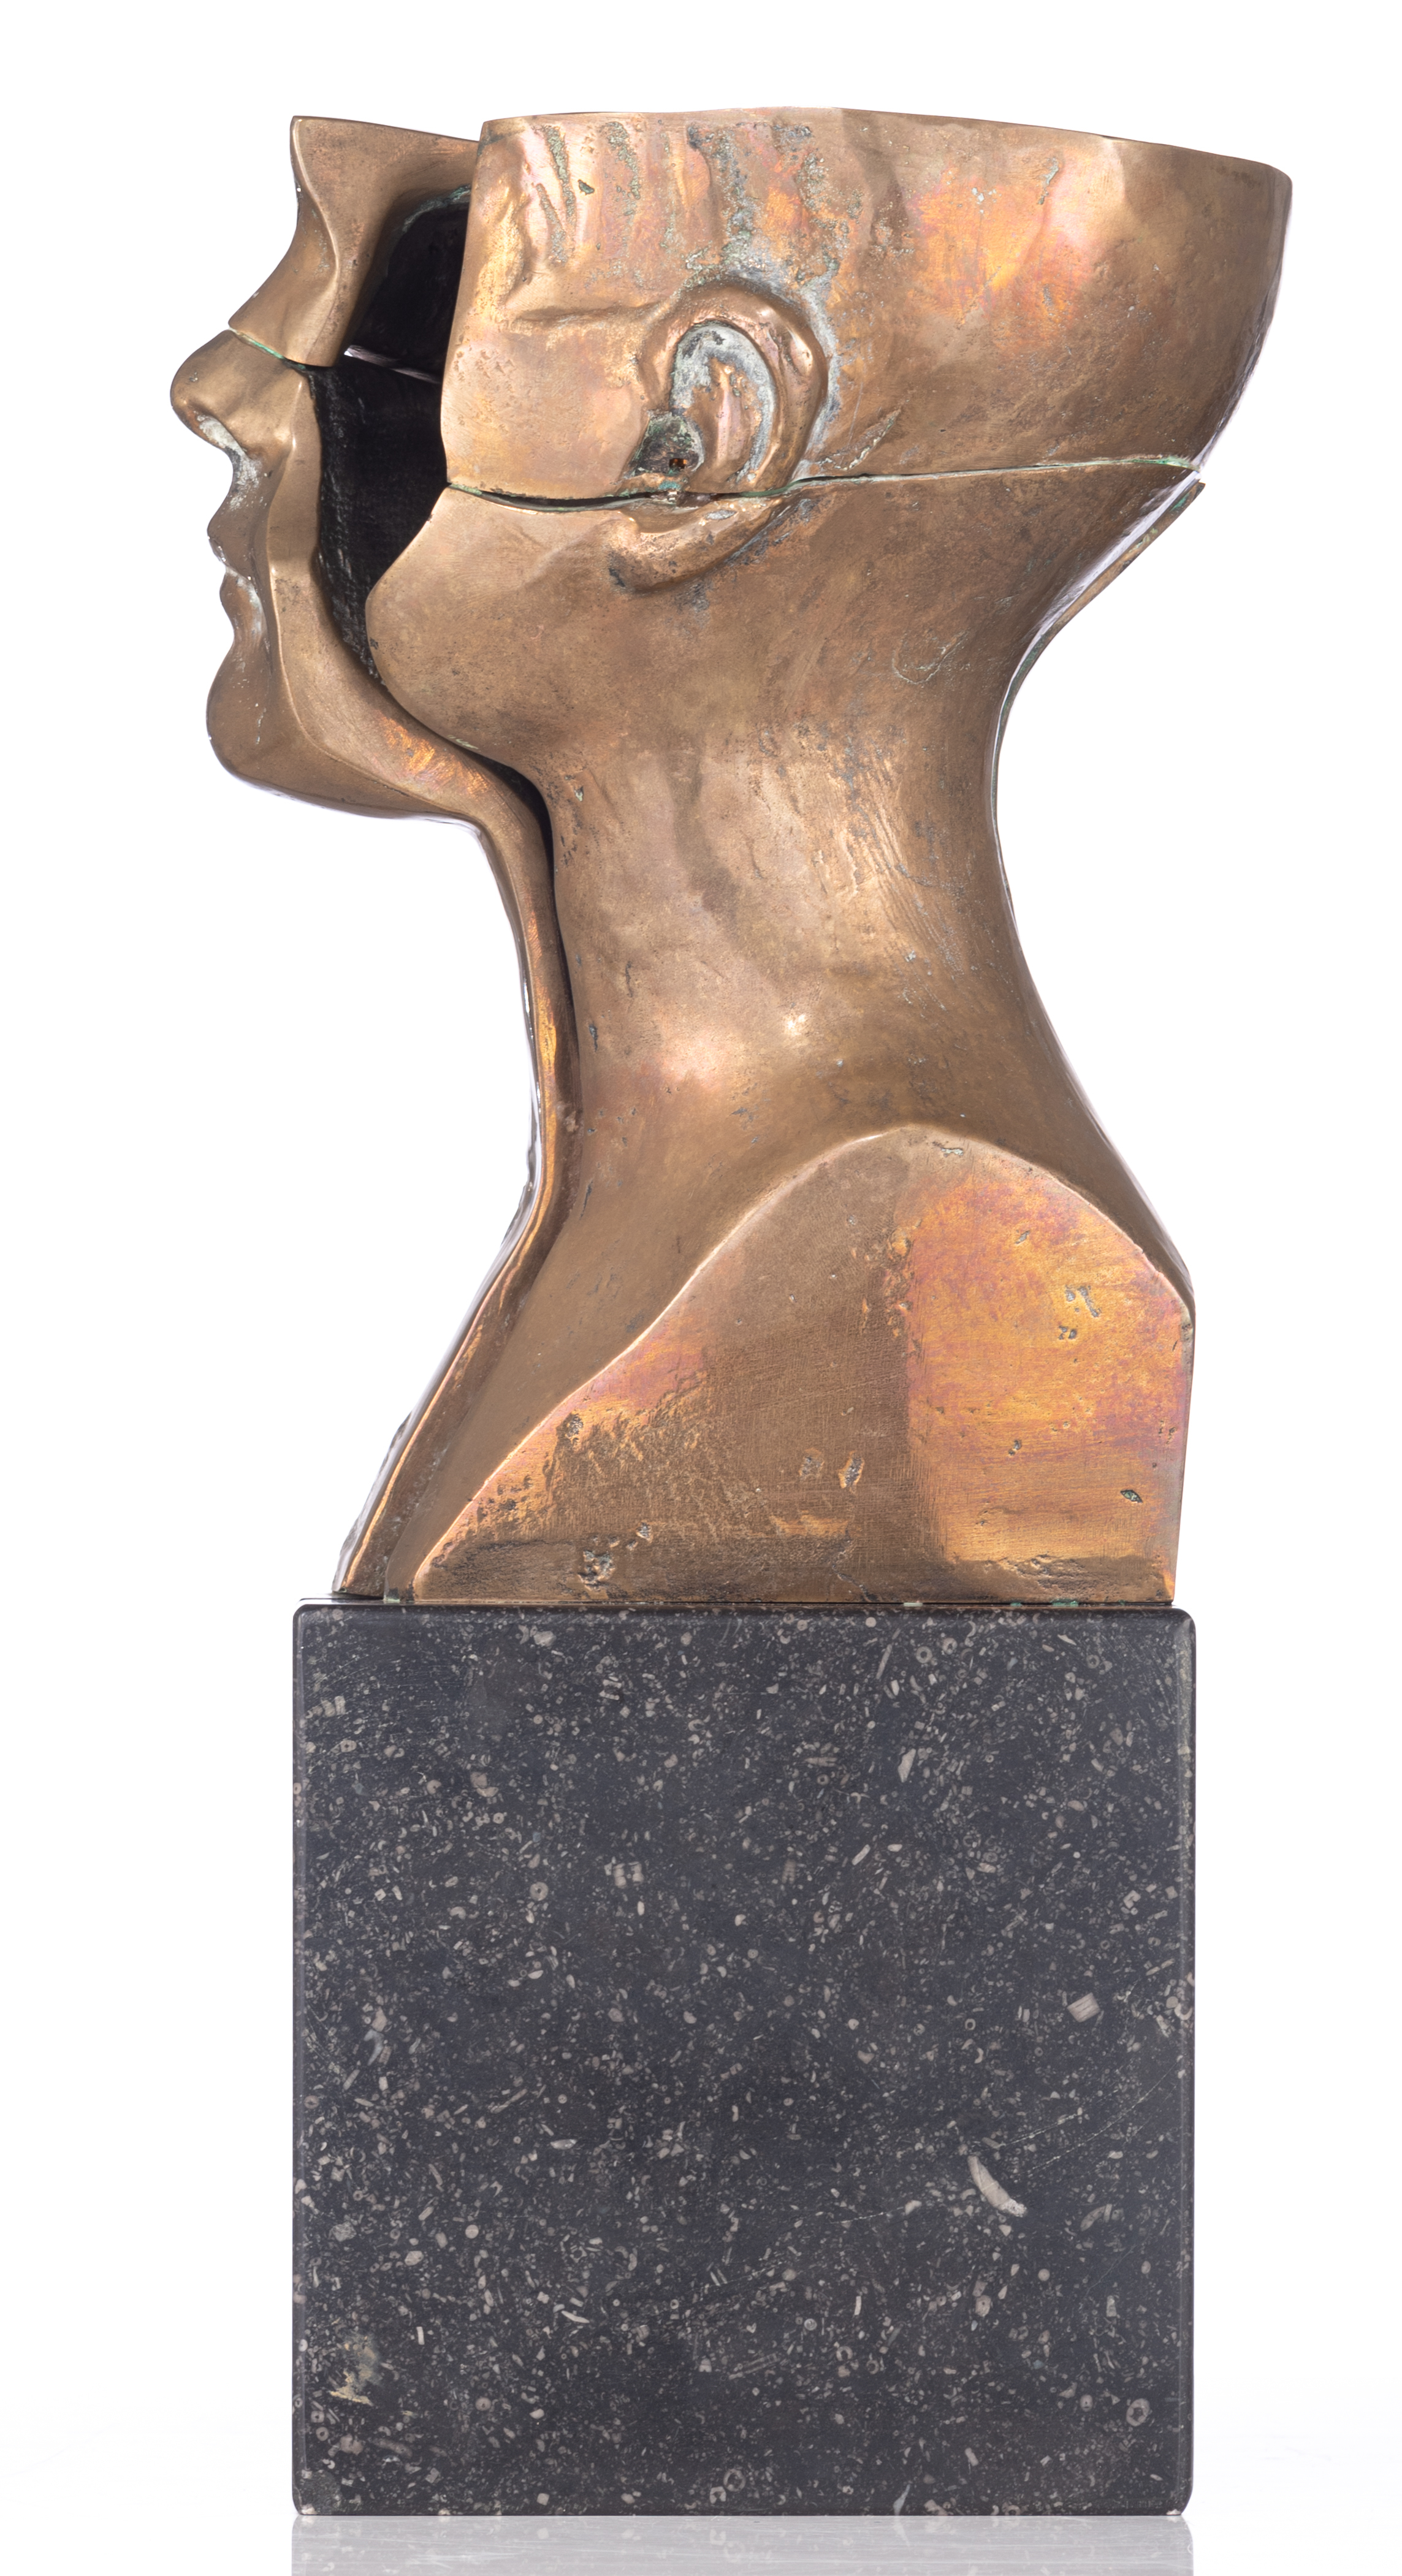 Claerhout J., untitled, patinated bronze, H 42 - W 46 cm. Added: Verjans R., untitled, dated 1975, N - Image 3 of 12